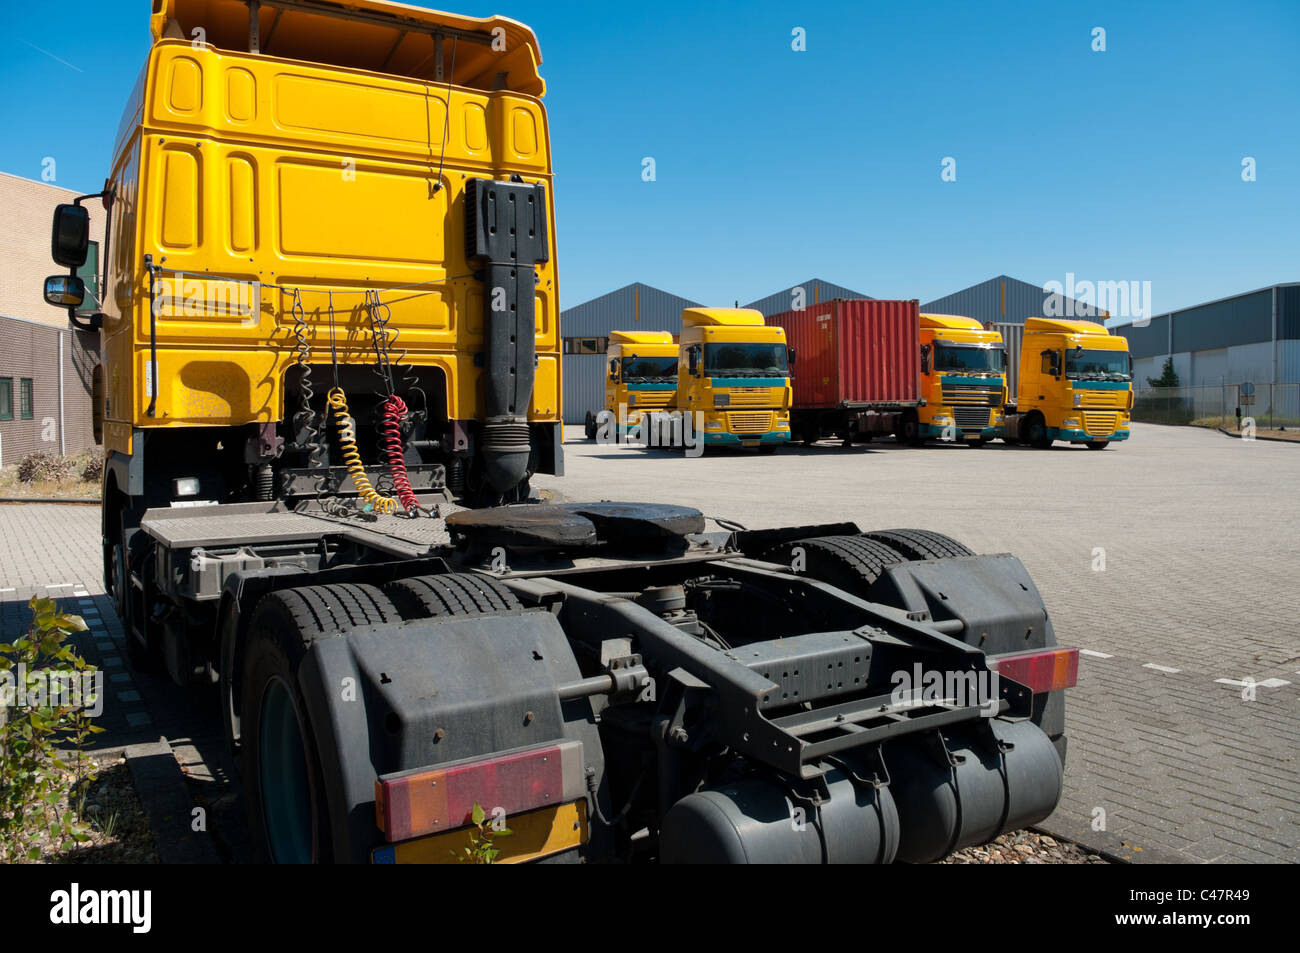 yellow trucks parked on an industrial area Stock Photo